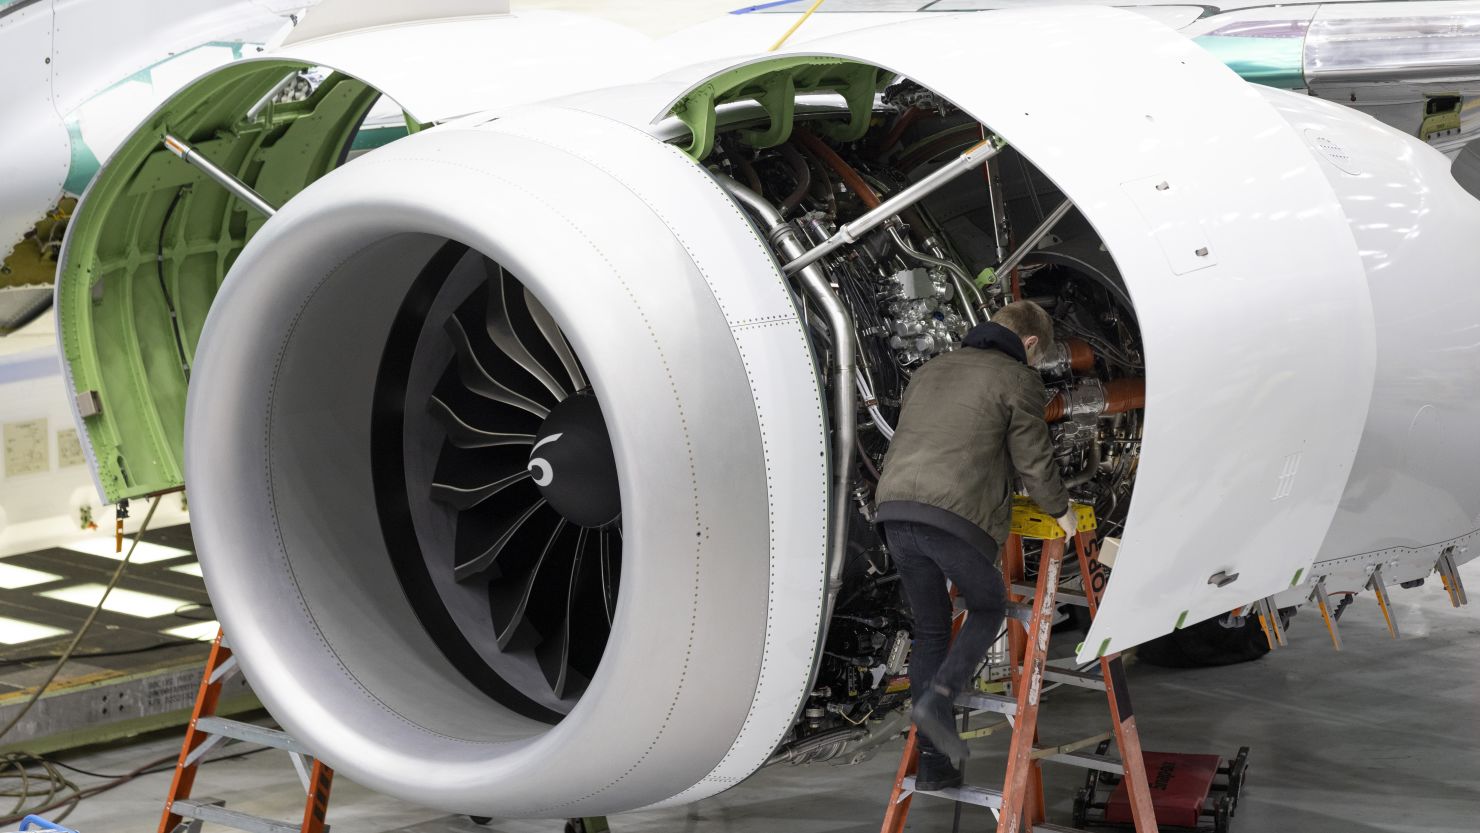 A Boeing employee works on the engine of a 737 MAX on the final assembly line at Boeing's Renton plant.